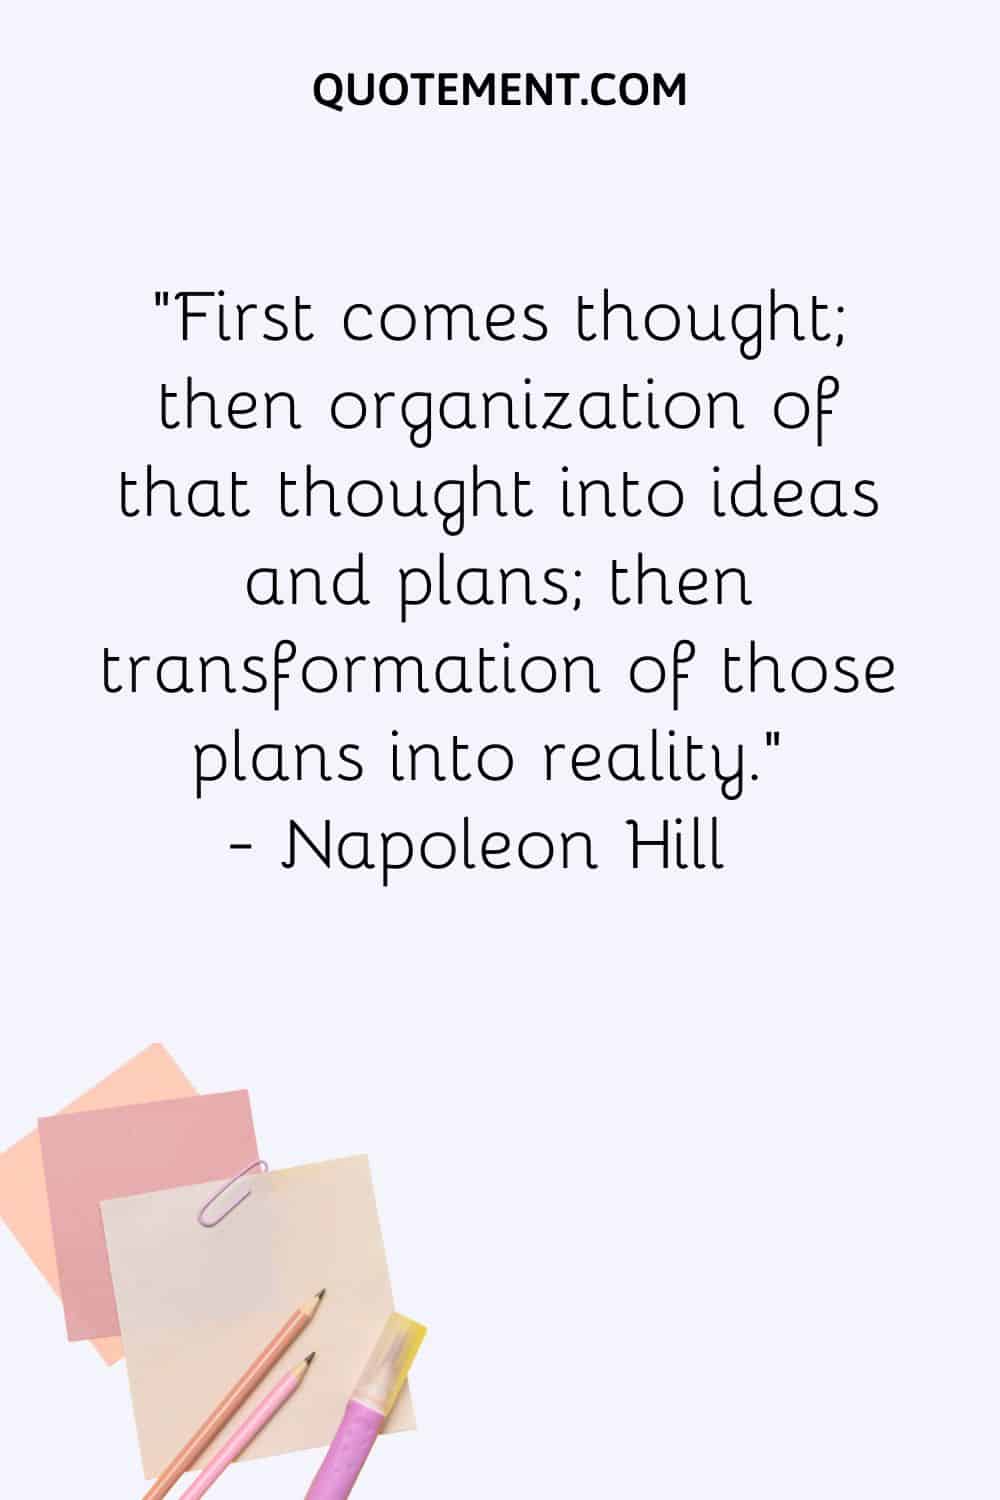 First comes thought; then organization of that thought into ideas and plans